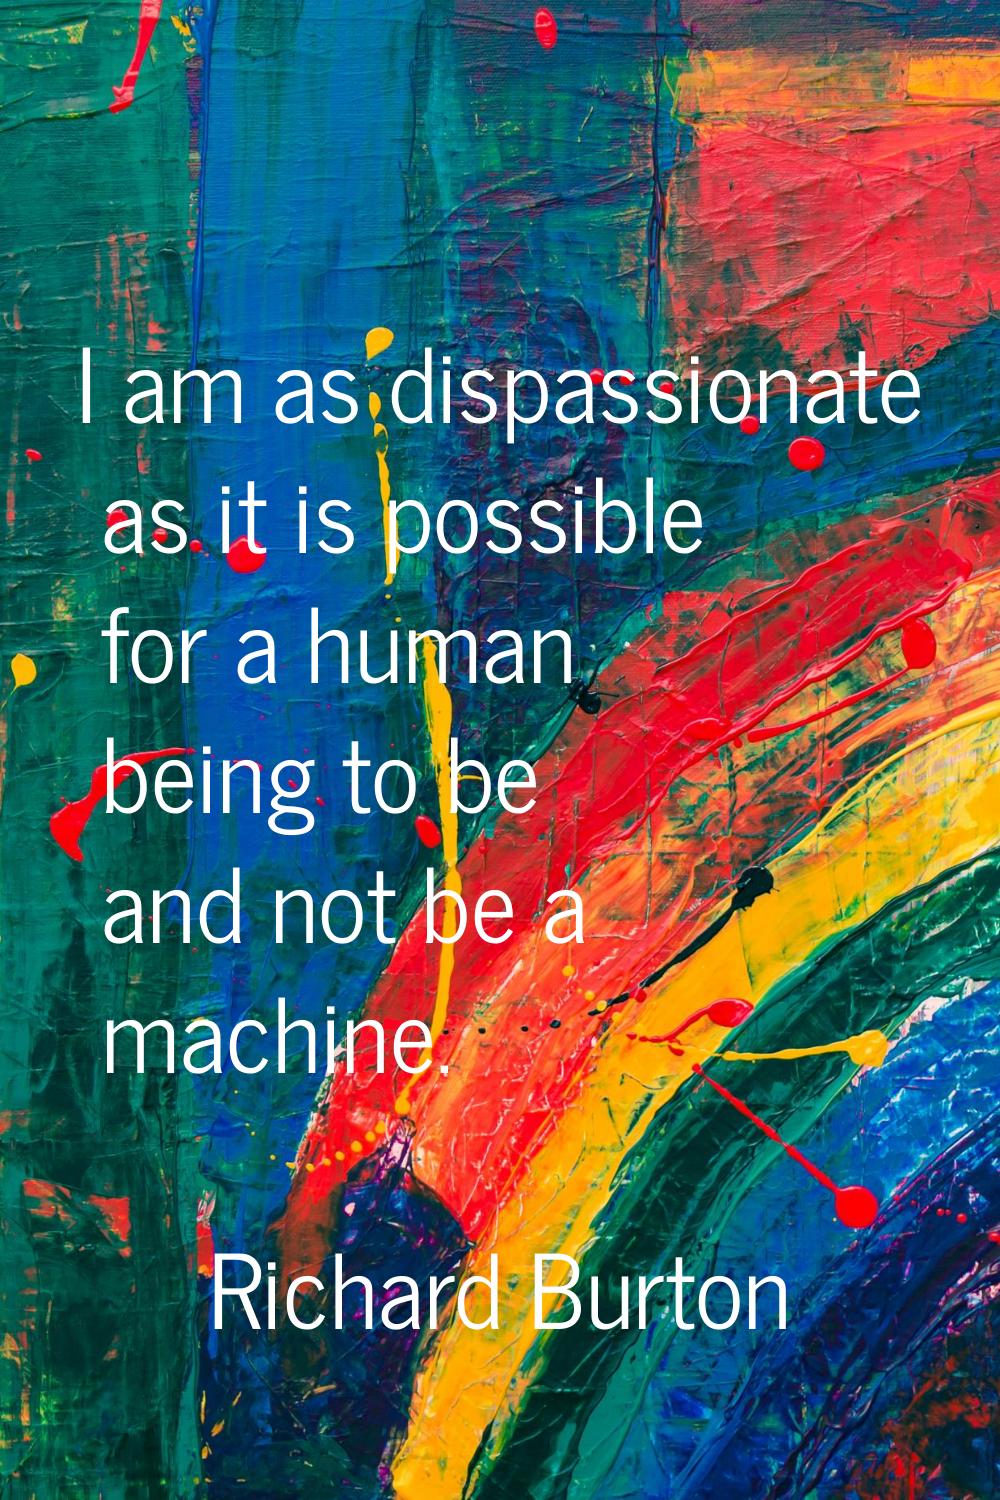 I am as dispassionate as it is possible for a human being to be and not be a machine.